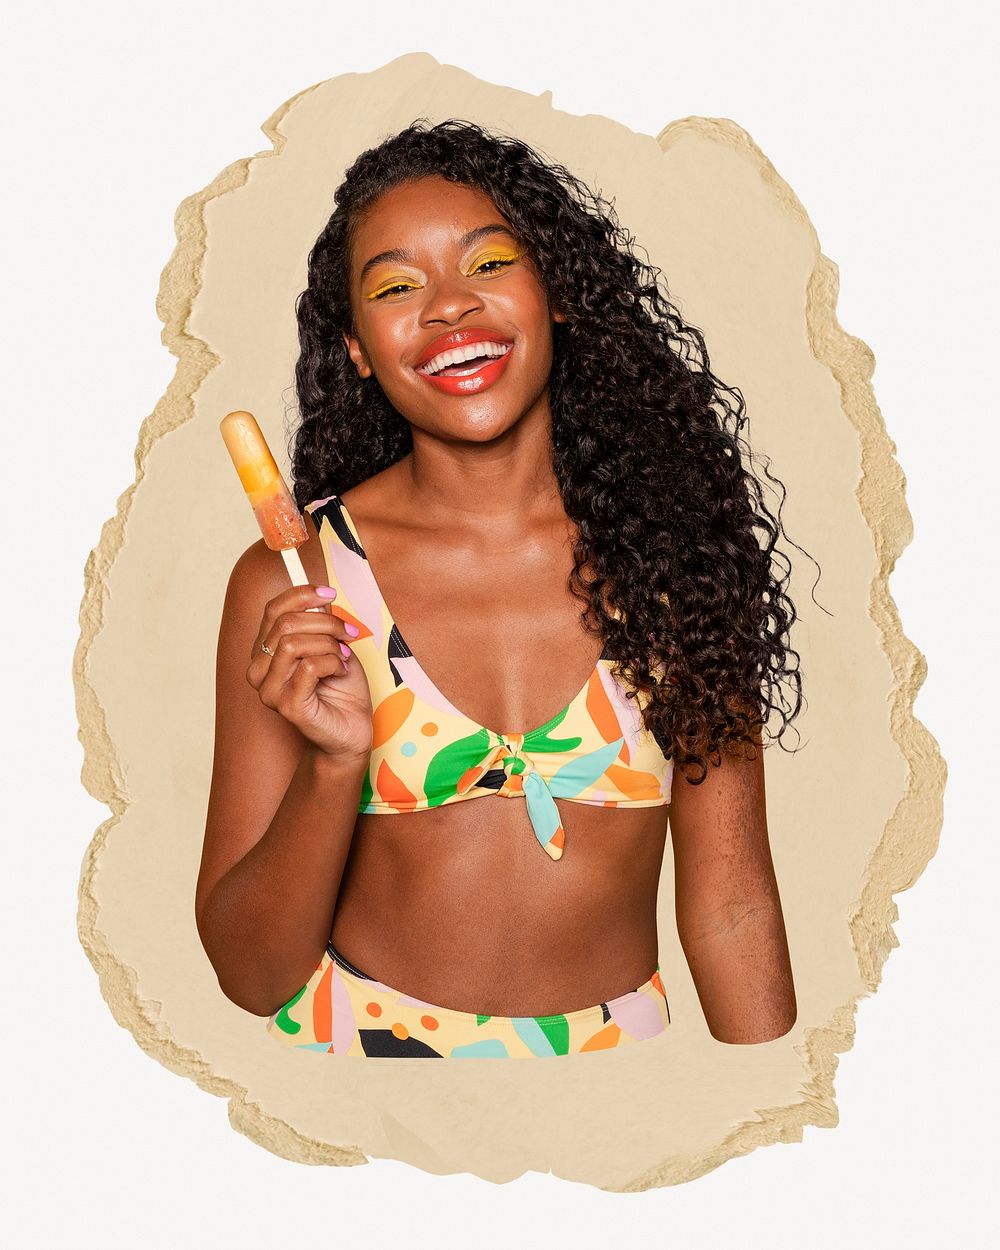 Cheerful Summer girl, ripped paper collage element